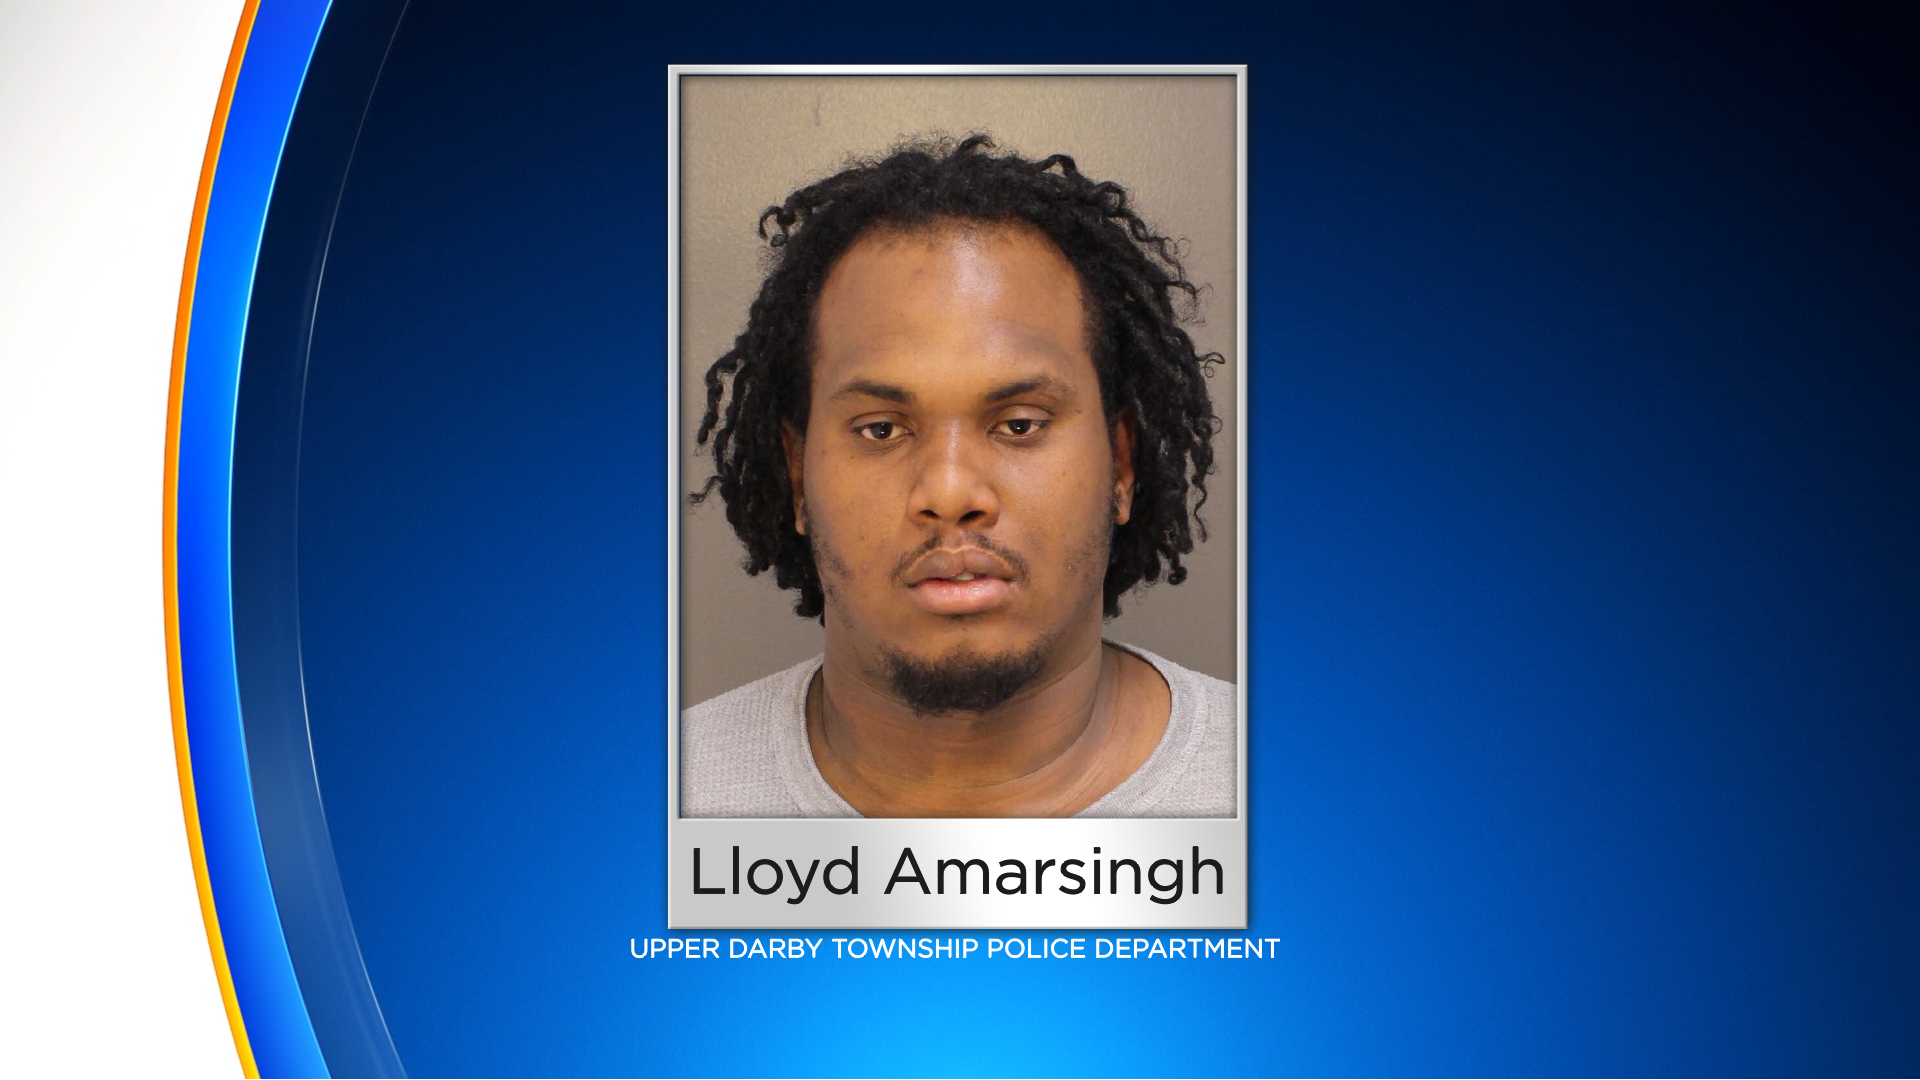 Lloyd Amarsingh, Darby Man Charged With Third Degree Murder After Claiming His Gun Went Off By Accident In Drexel Hill Shooting